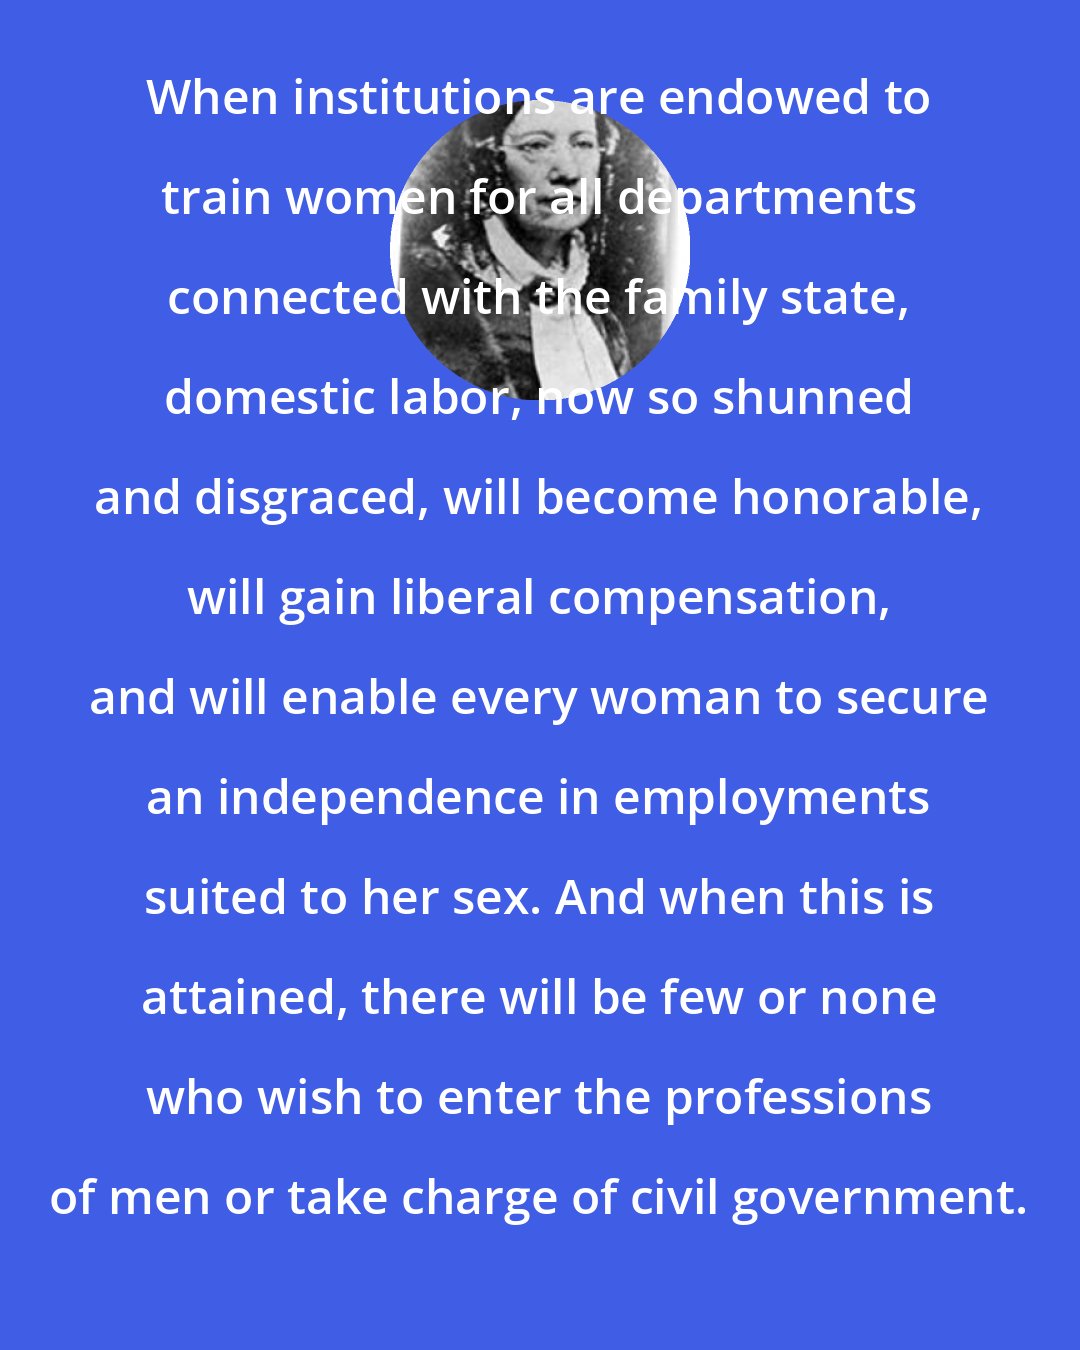 Catharine Beecher: When institutions are endowed to train women for all departments connected with the family state, domestic labor, now so shunned and disgraced, will become honorable, will gain liberal compensation, and will enable every woman to secure an independence in employments suited to her sex. And when this is attained, there will be few or none who wish to enter the professions of men or take charge of civil government.